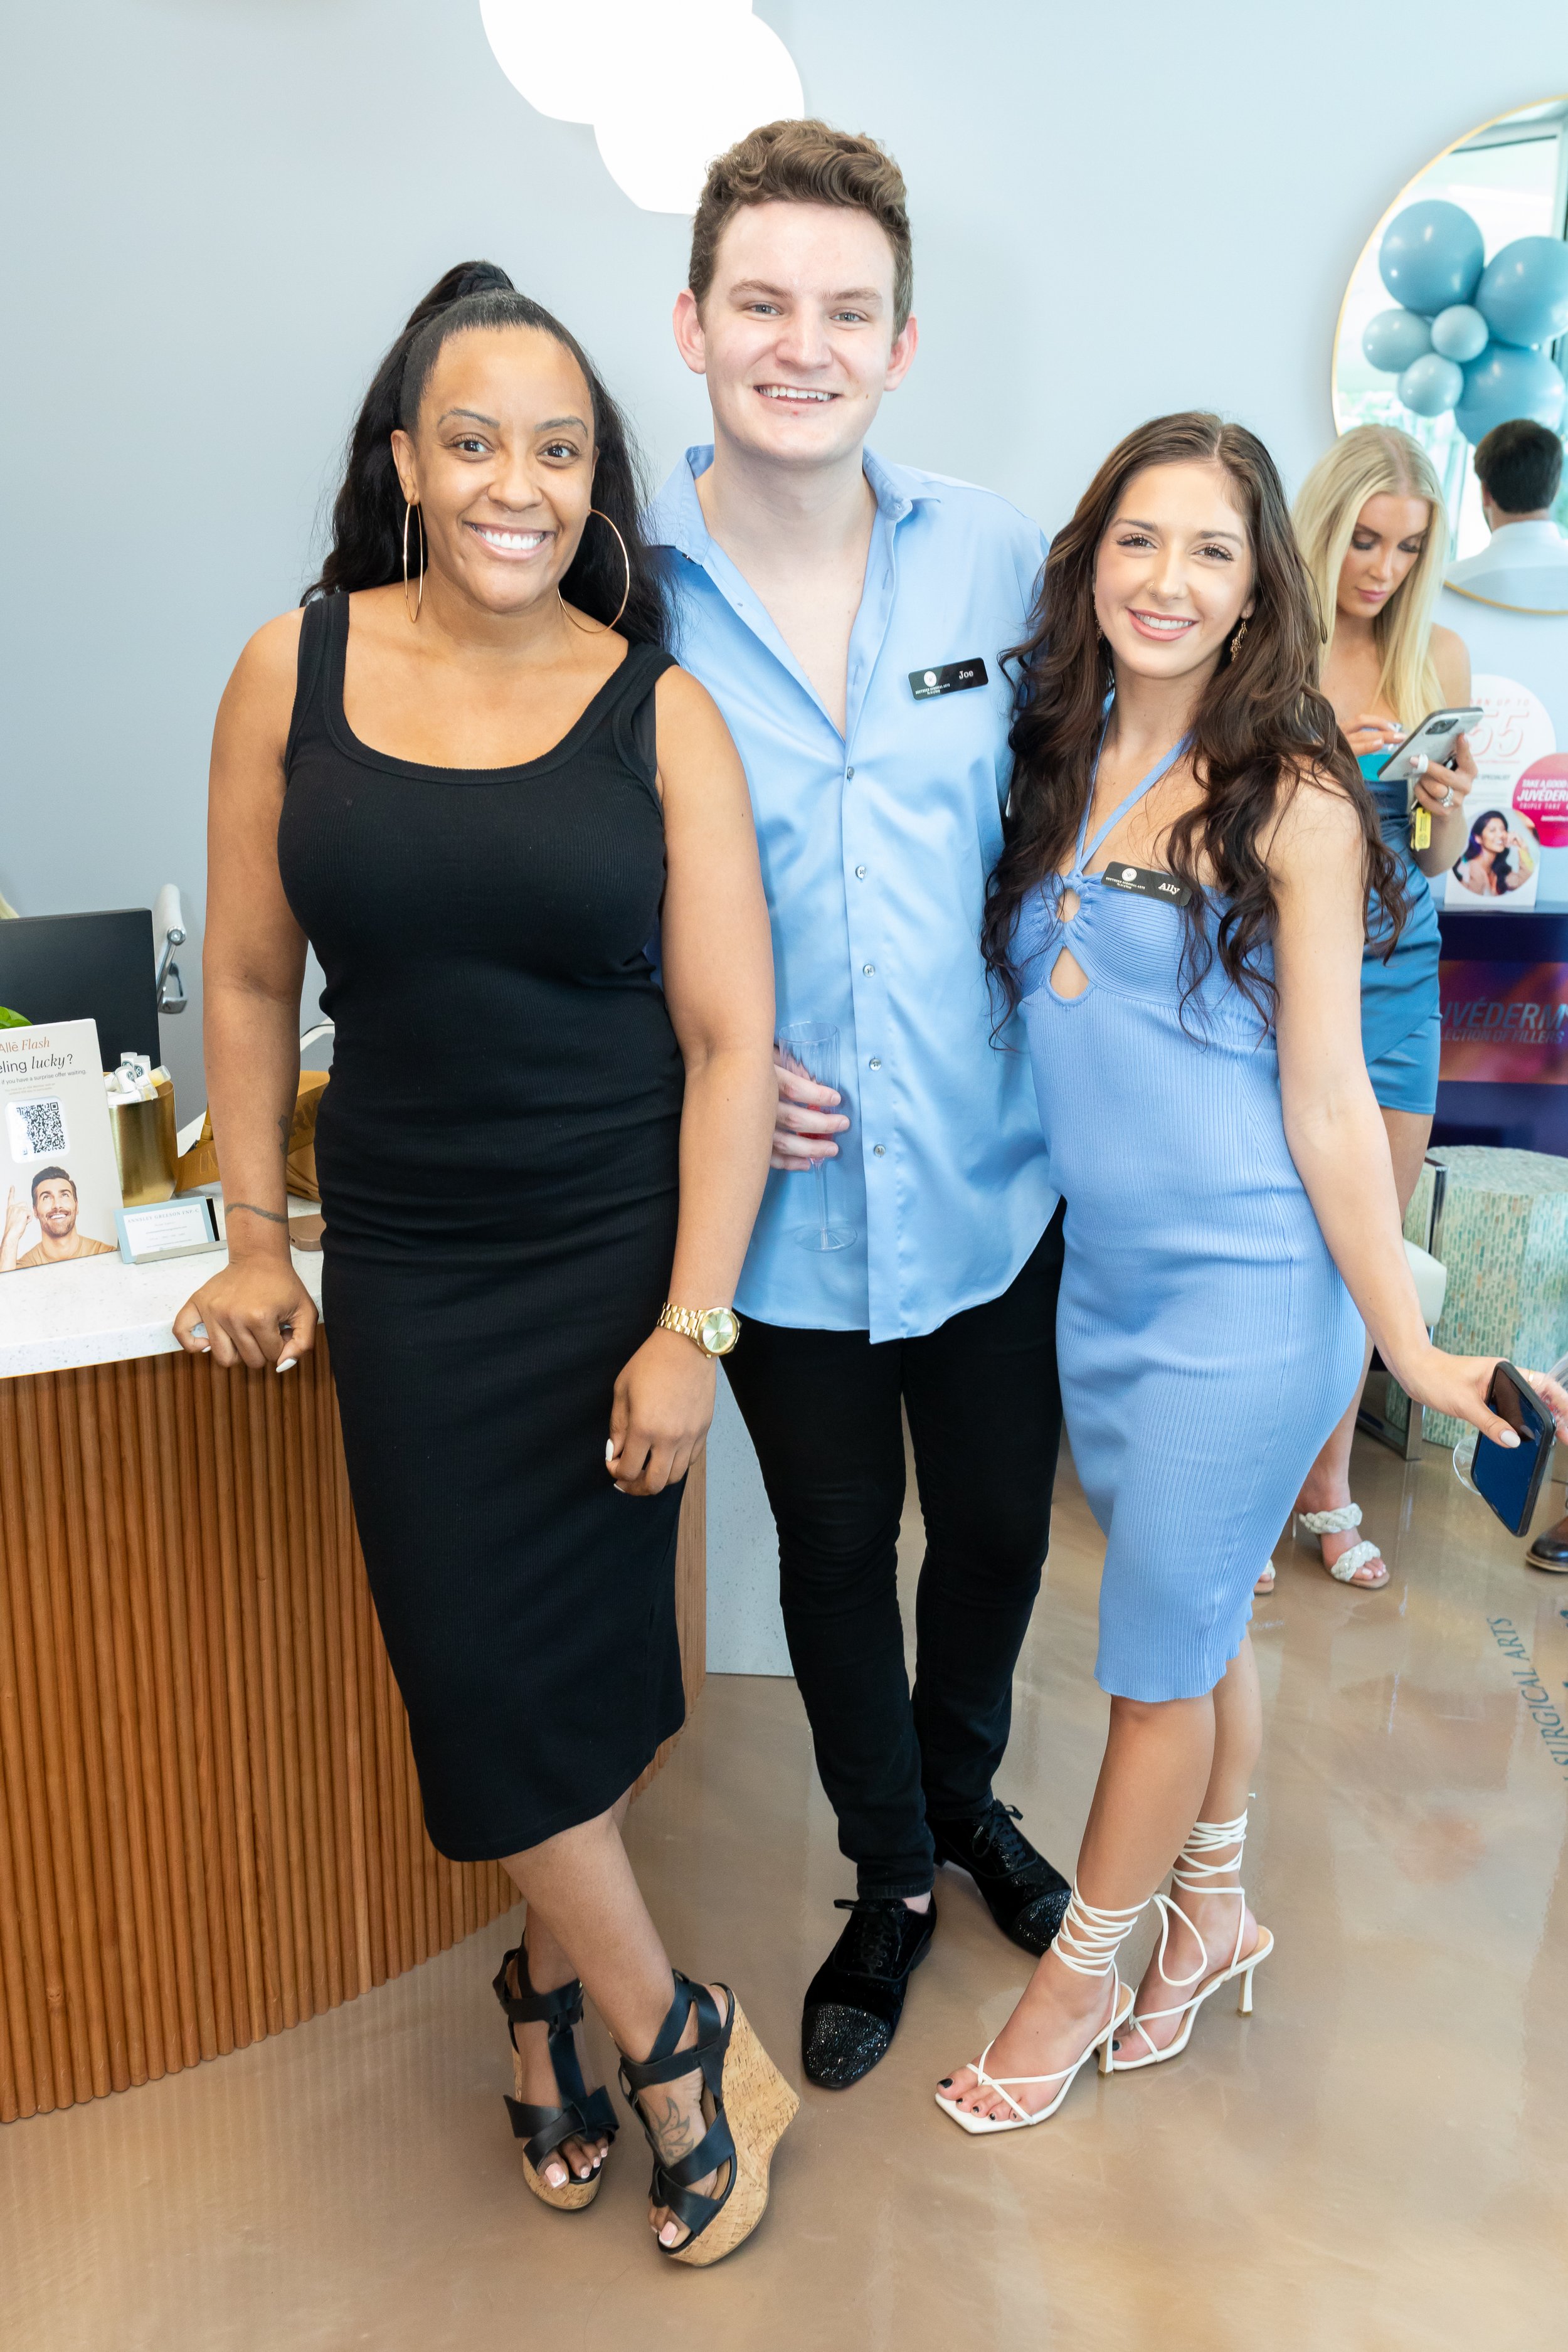 20230817-The Luxe List Atlanta-Southern Surgical Arts Beauty Bar Grand Opening-THU-BC-124.jpg (Copy)